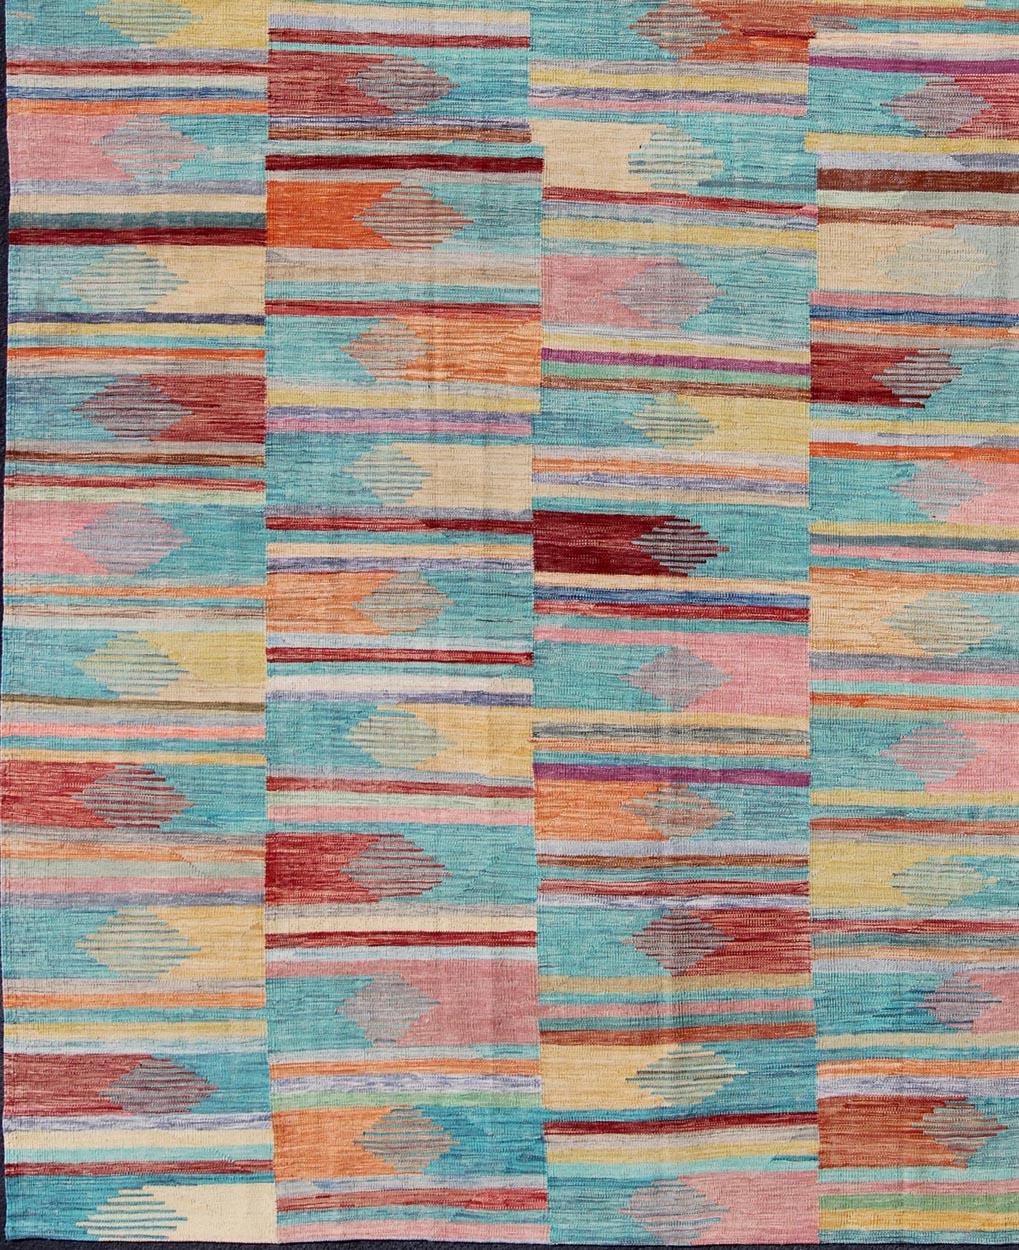 Casual flat-weave modern design Kilim rug with rainbow colors in modern design, Keivan Woven Arts / rug afg-27679, country of origin / type: Afghanistan / Kilim
Colorful flat-weave modern Kilim rug with modern design for modern interiors.
This fun